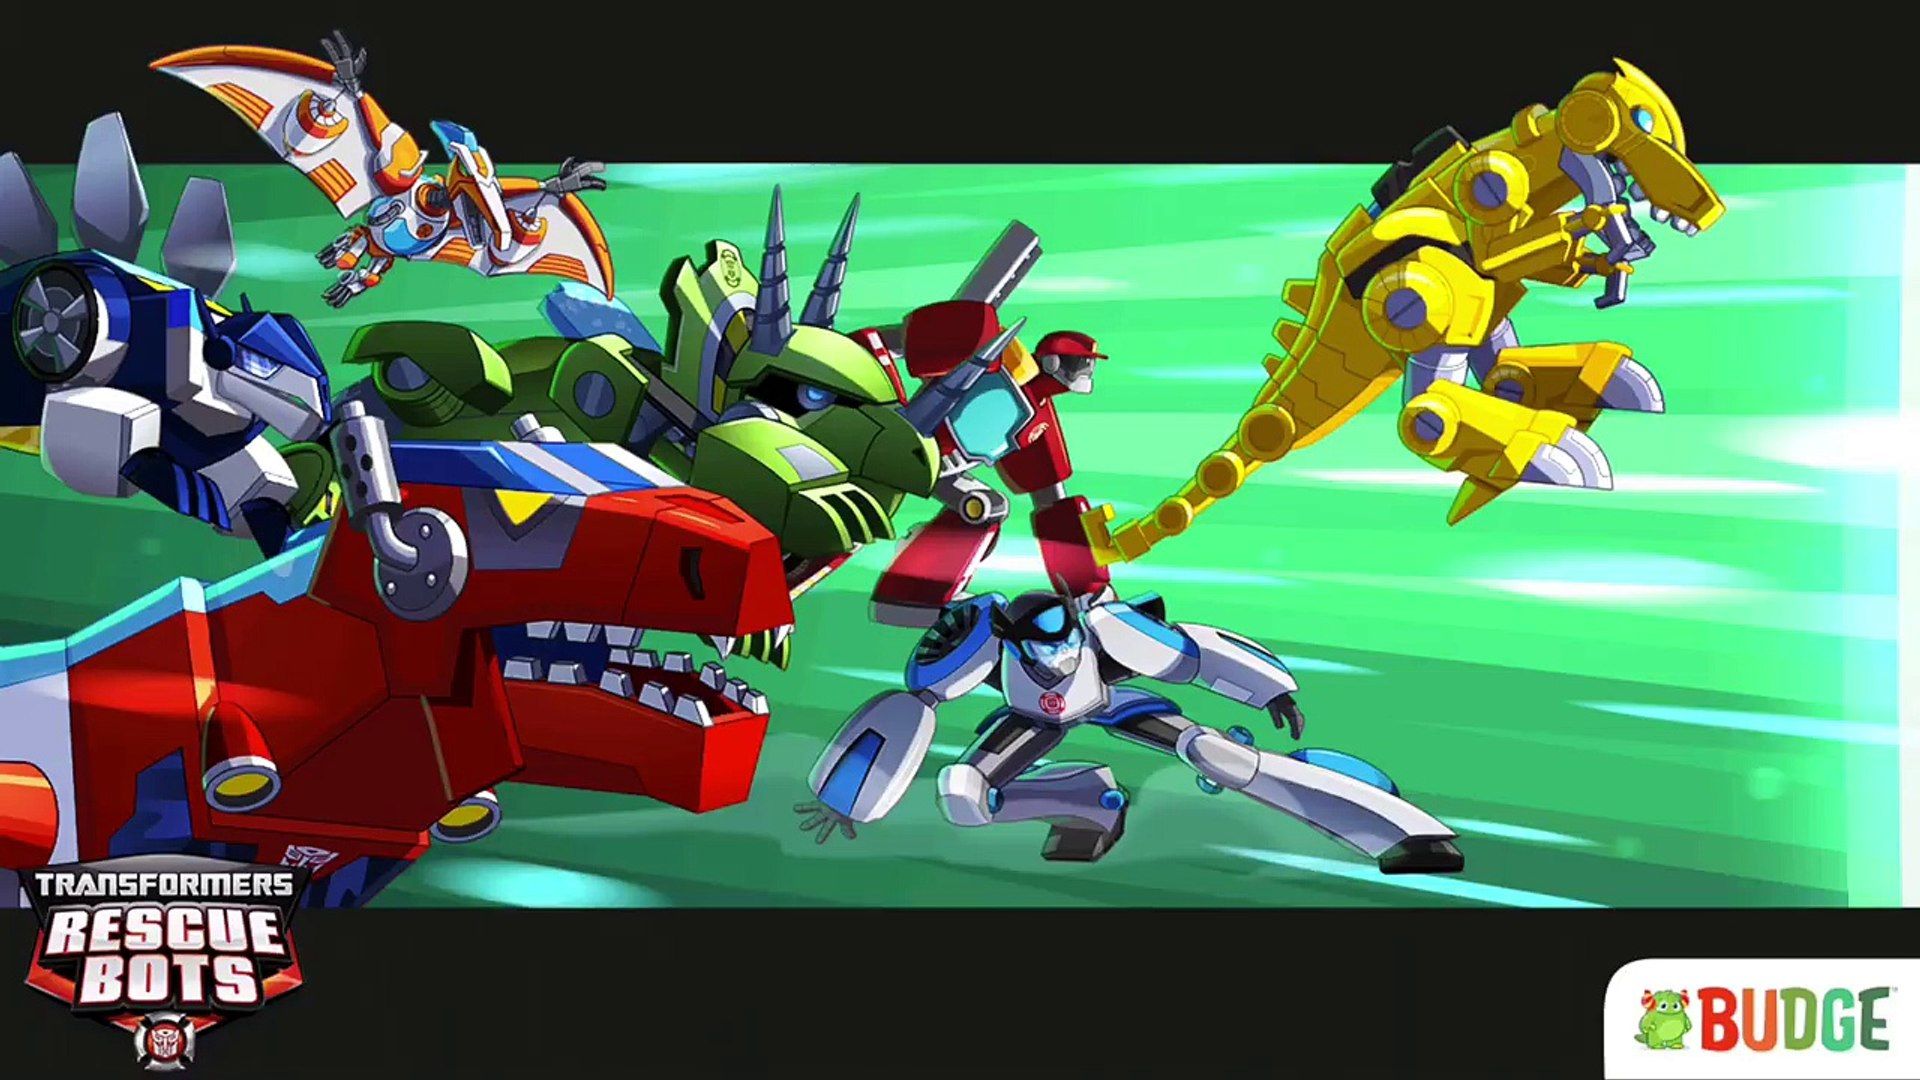 COMPLETE exciting missions!. Transformers Rescue Bots: Disaster Dash Run By Budgeéo Dailymotion